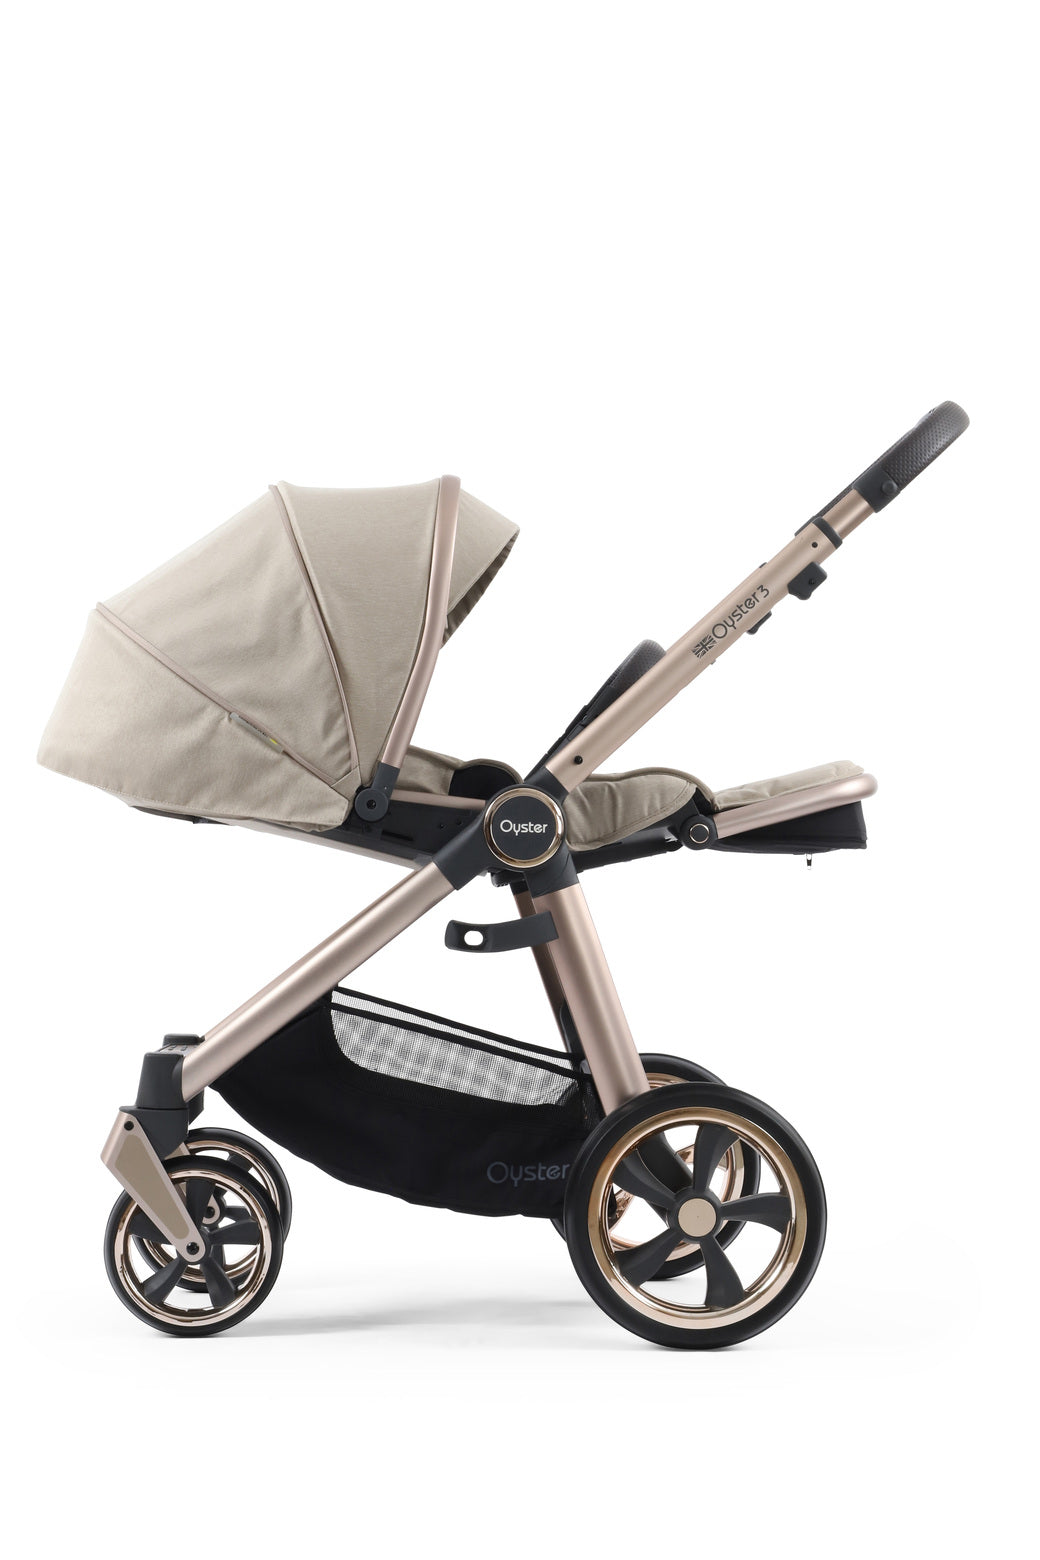 Babystyle Oyster 3 Pushchair - Creme Brulee -  | For Your Little One